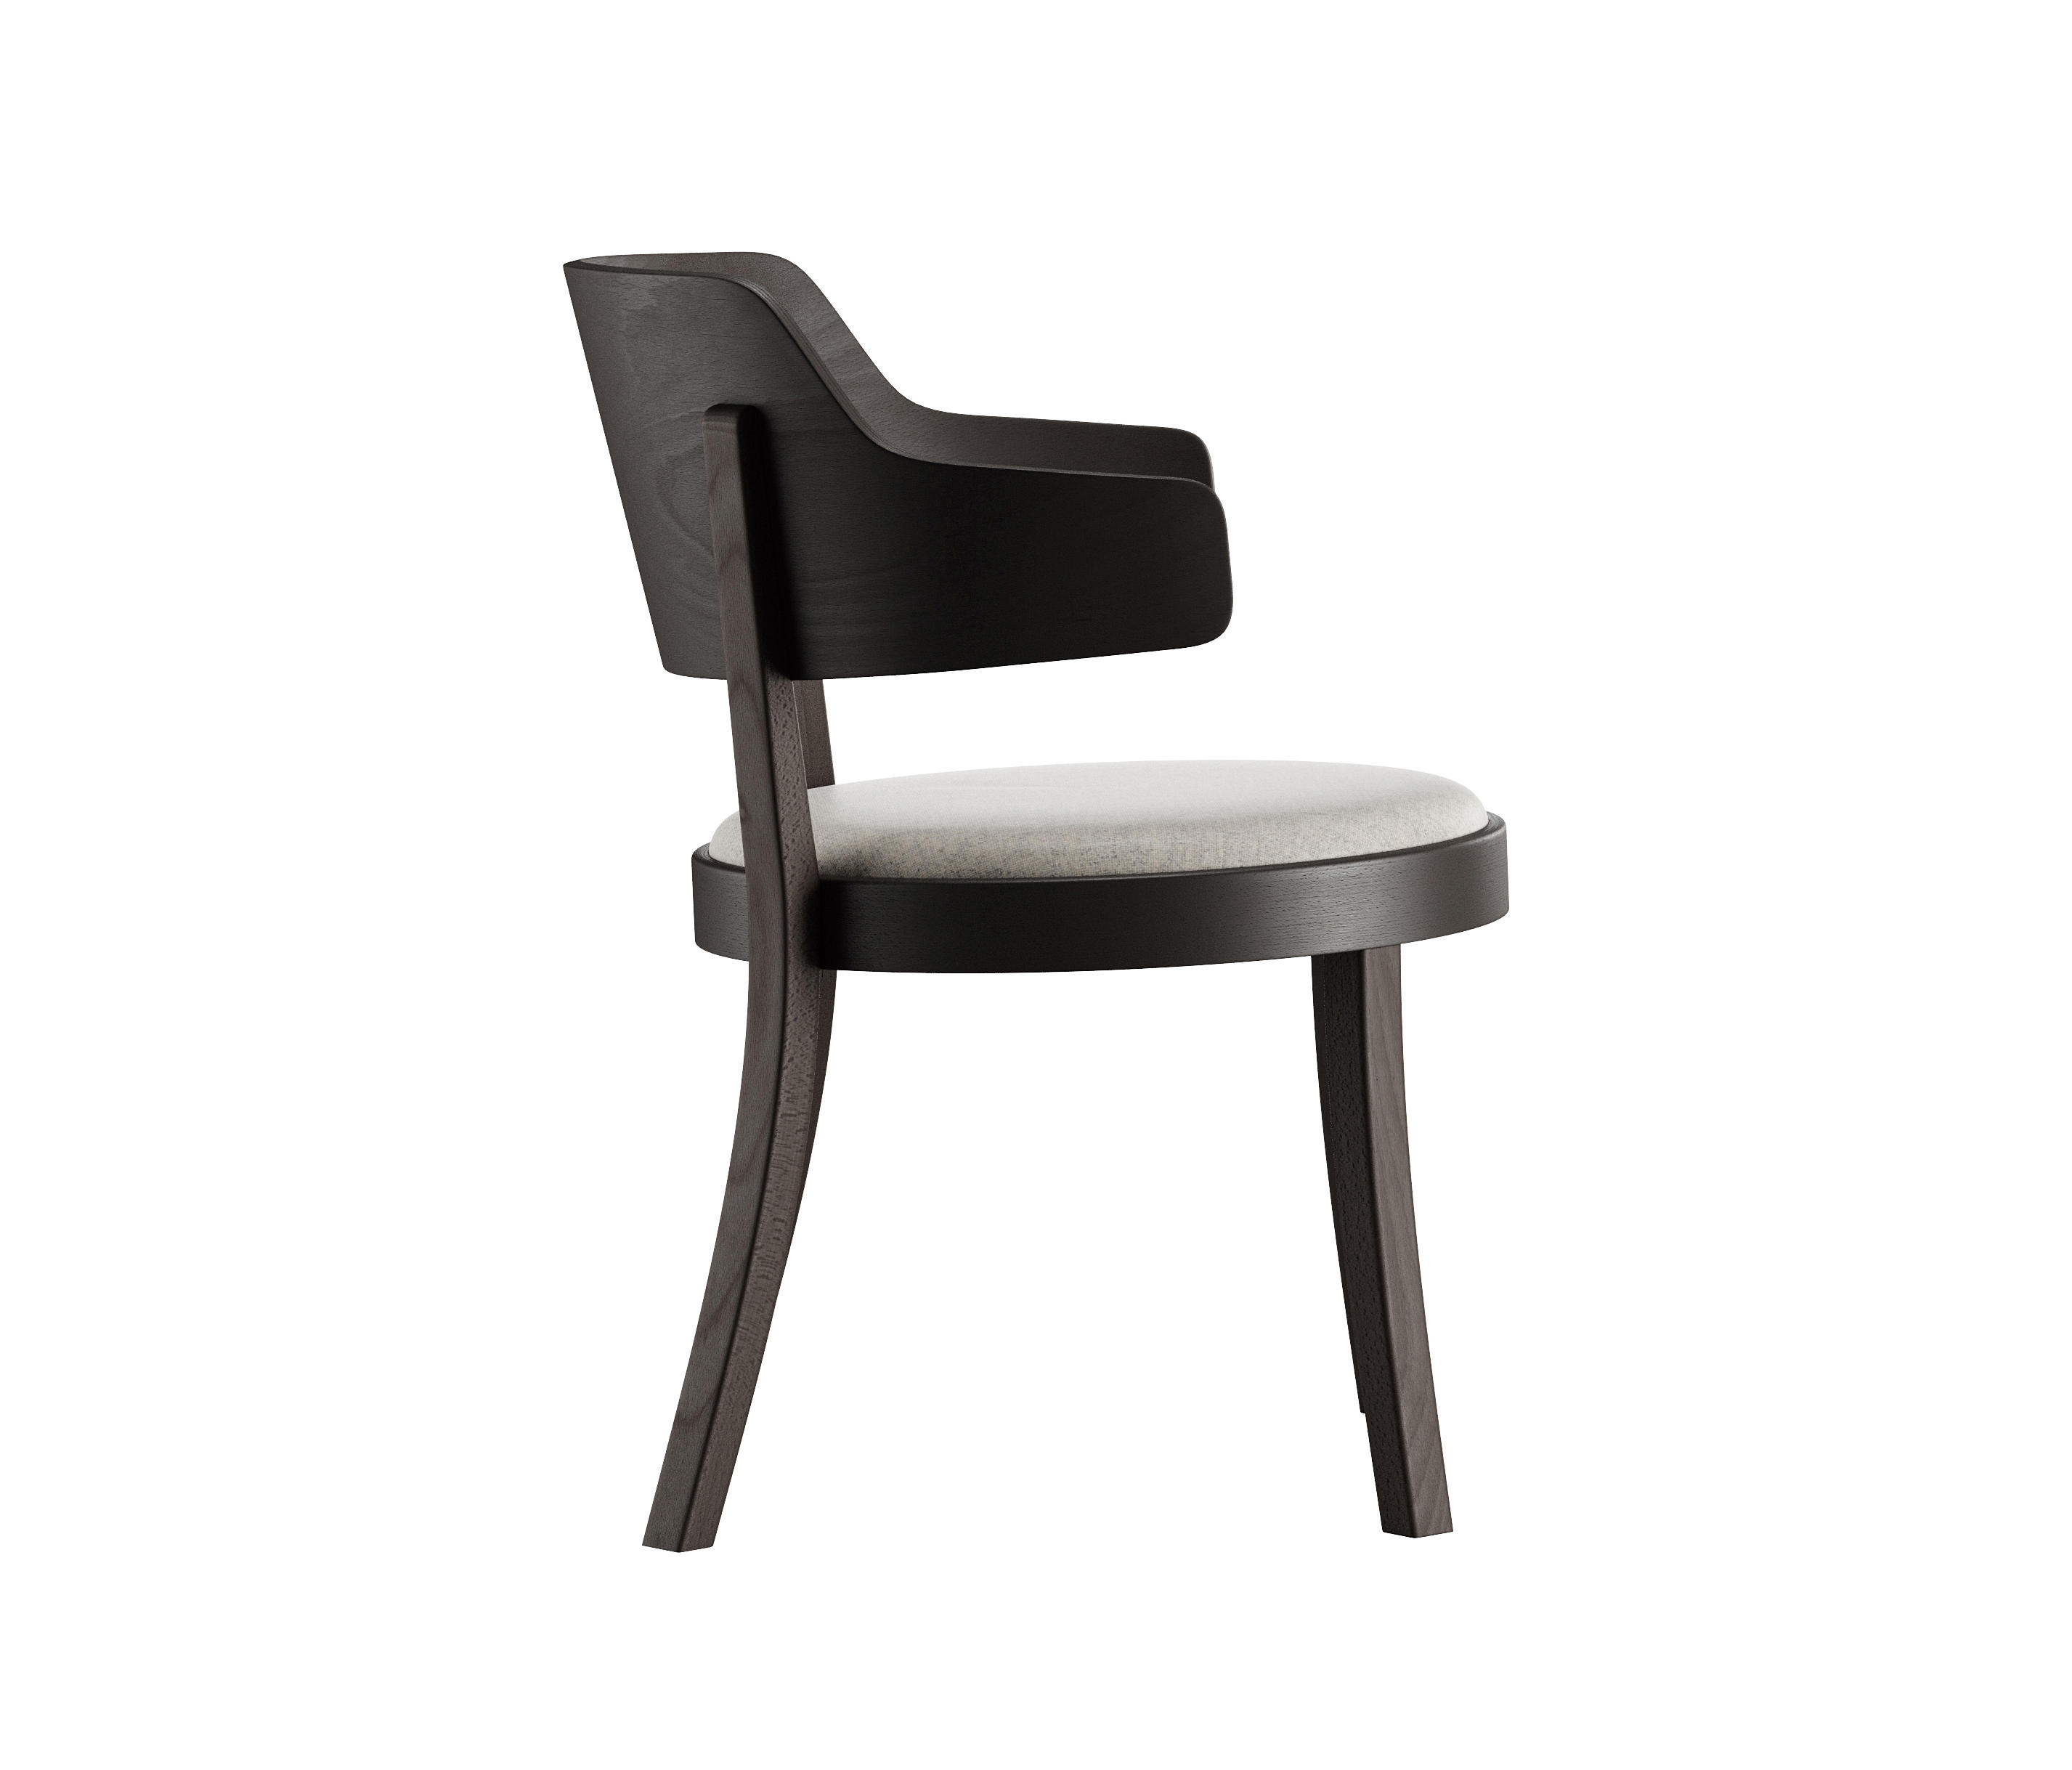 Seley 1 423 Chairs From Horgenglarus Architonic